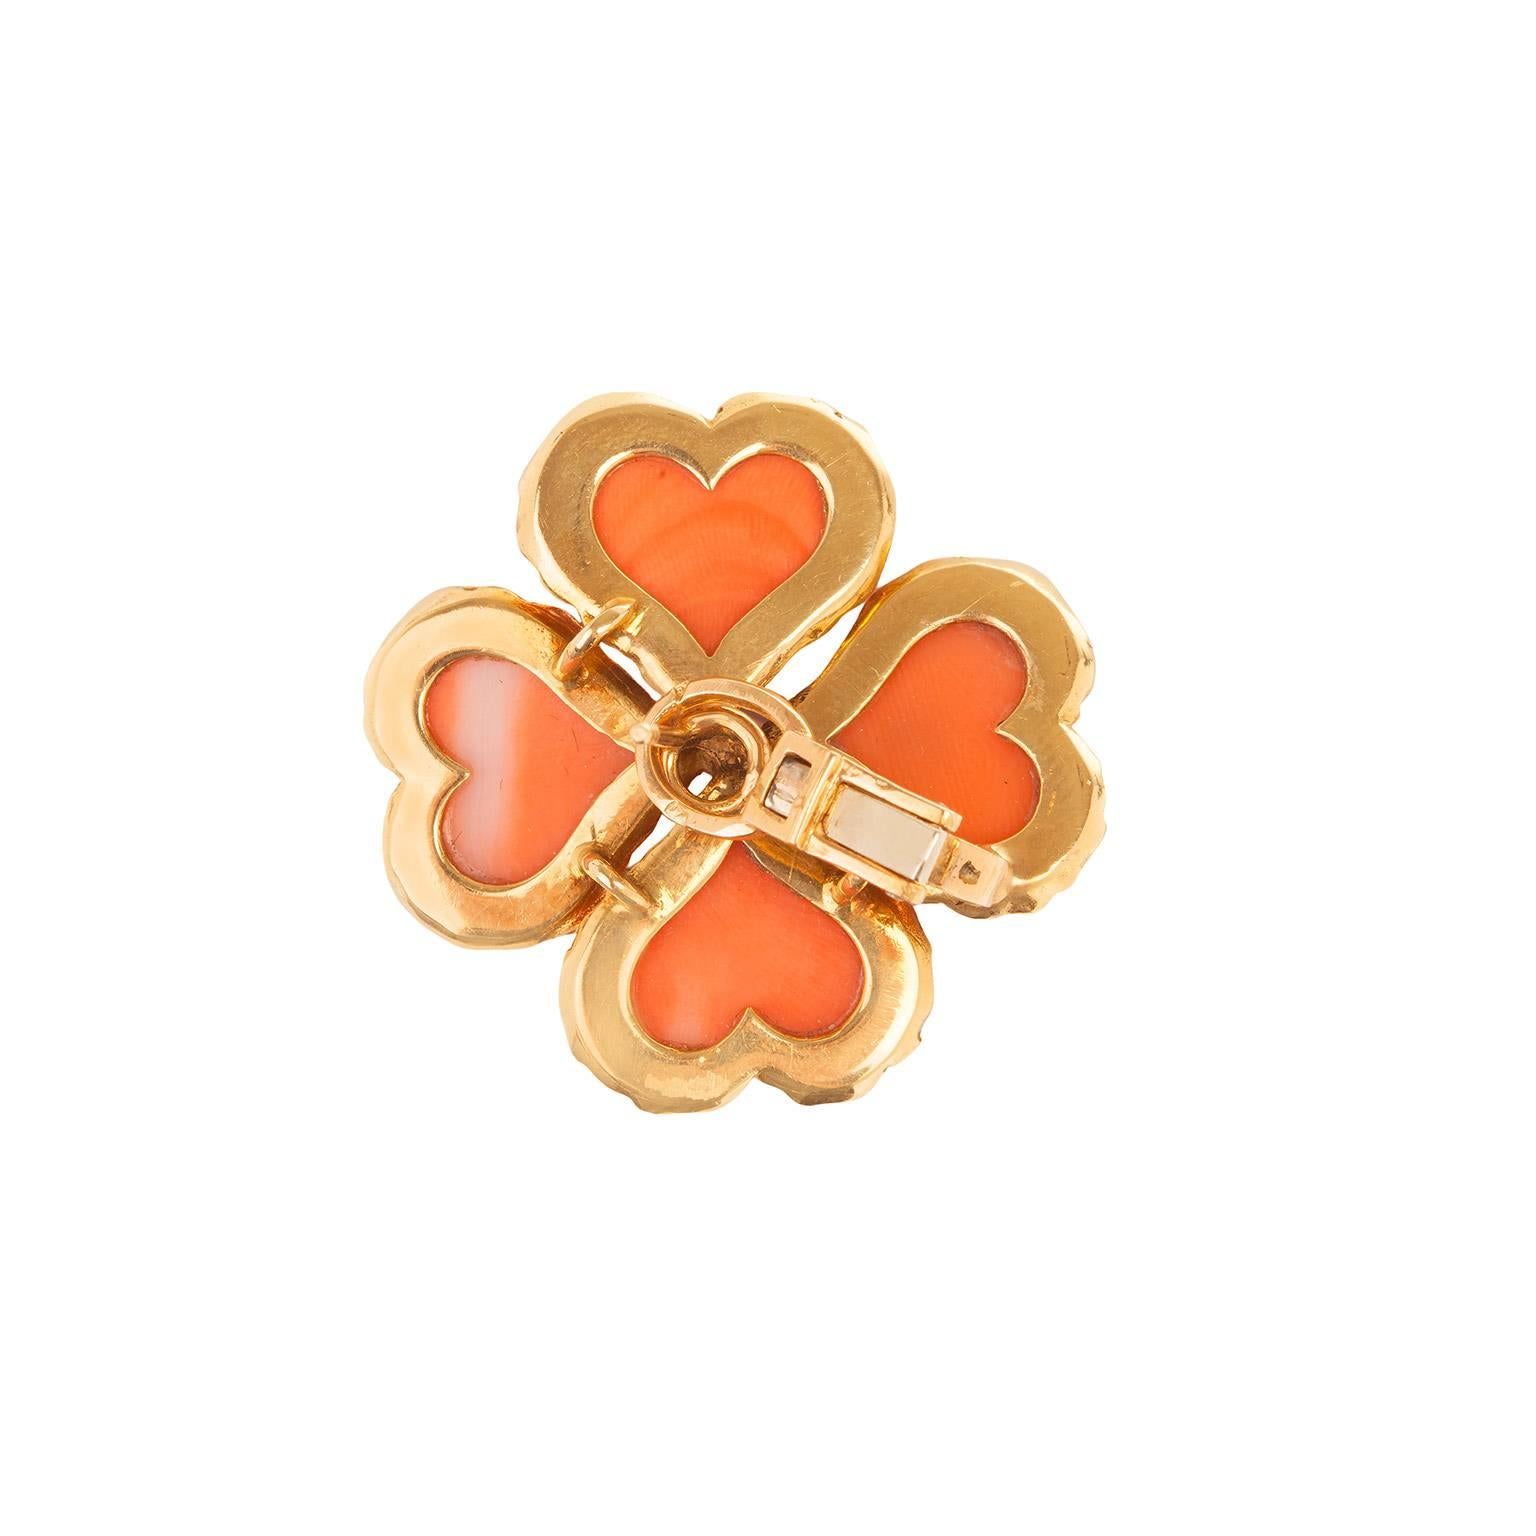 A with a single prong set dimo wonderful pair of coral and diamond earrings set in 18k yellow gold.  The earrings are designed in the shape of a clover with a single prong set diamond in the center of each  with a total weight of